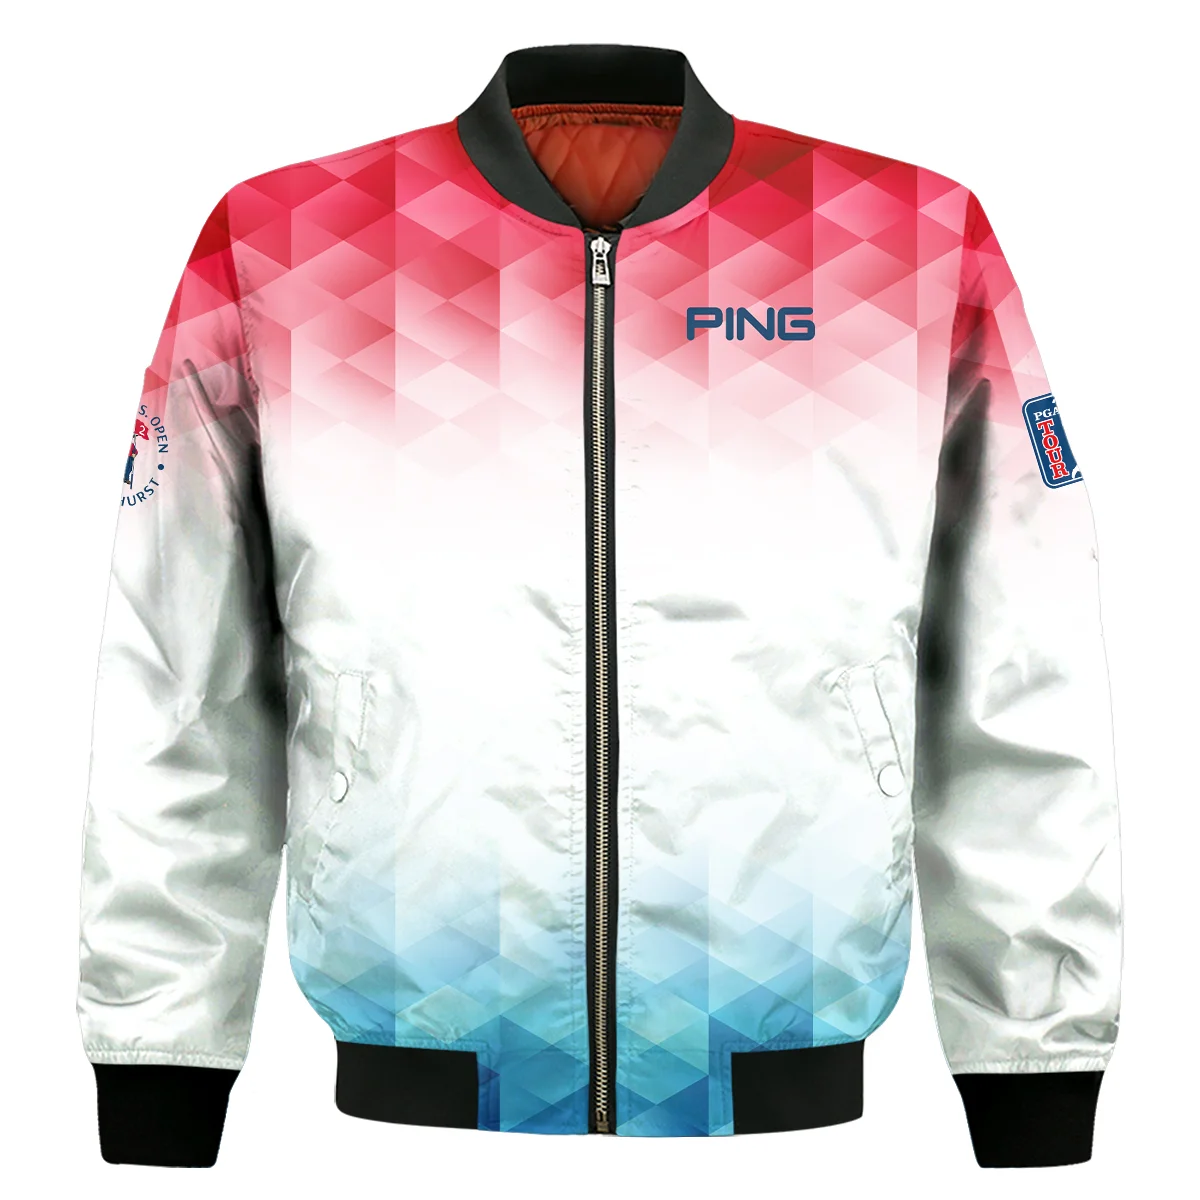 124th U.S. Open Pinehurst Ping Golf Sport Bomber Jacket Blue Red Abstract Geometric Triangles All Over Print Bomber Jacket